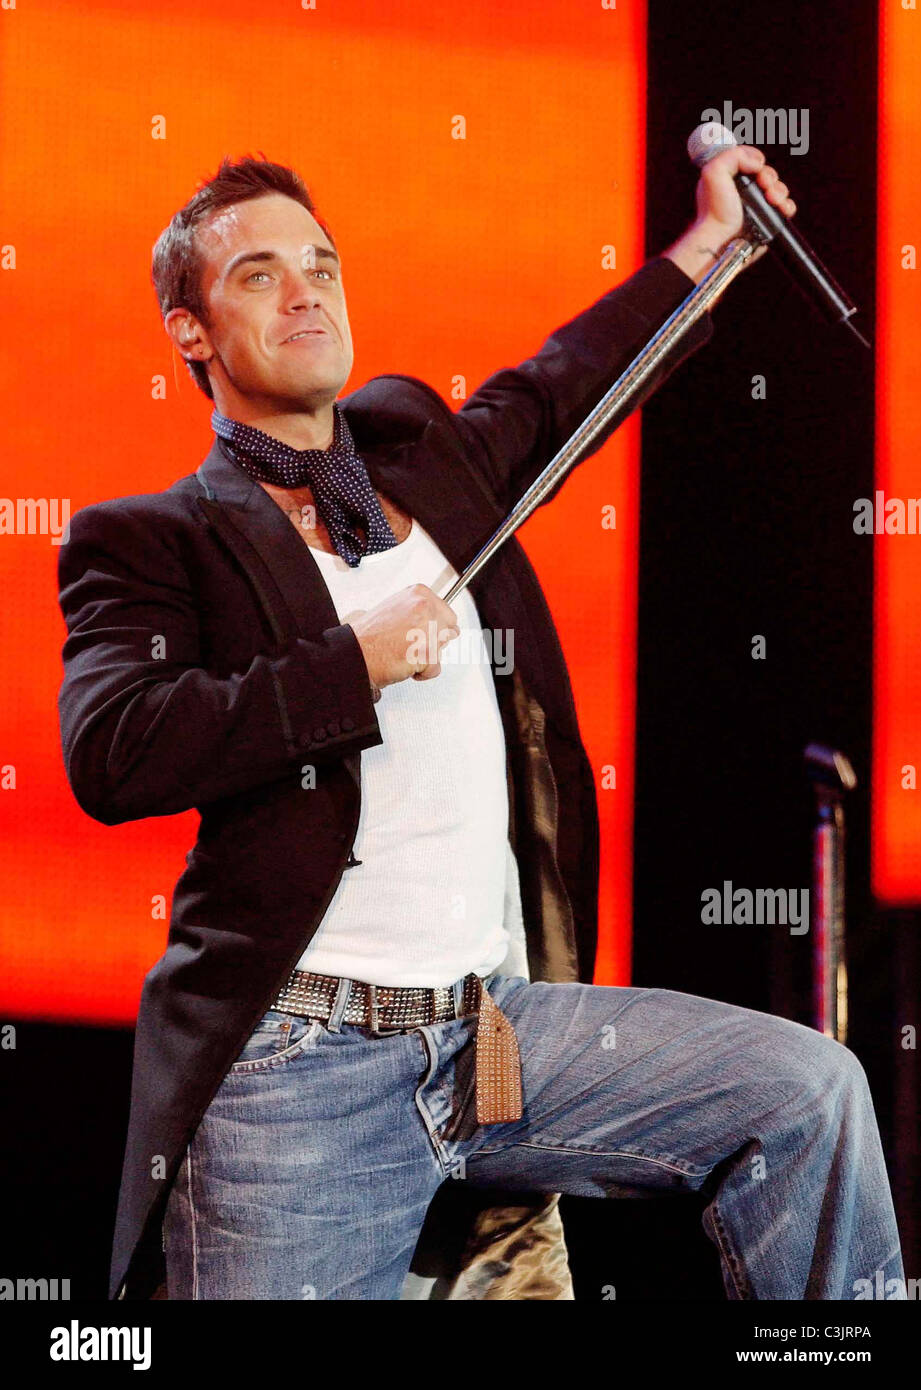 Robbie Williams, ex member of boy band Take That, performing at Live 8 at London's Hyde Park, UK Stock Photo